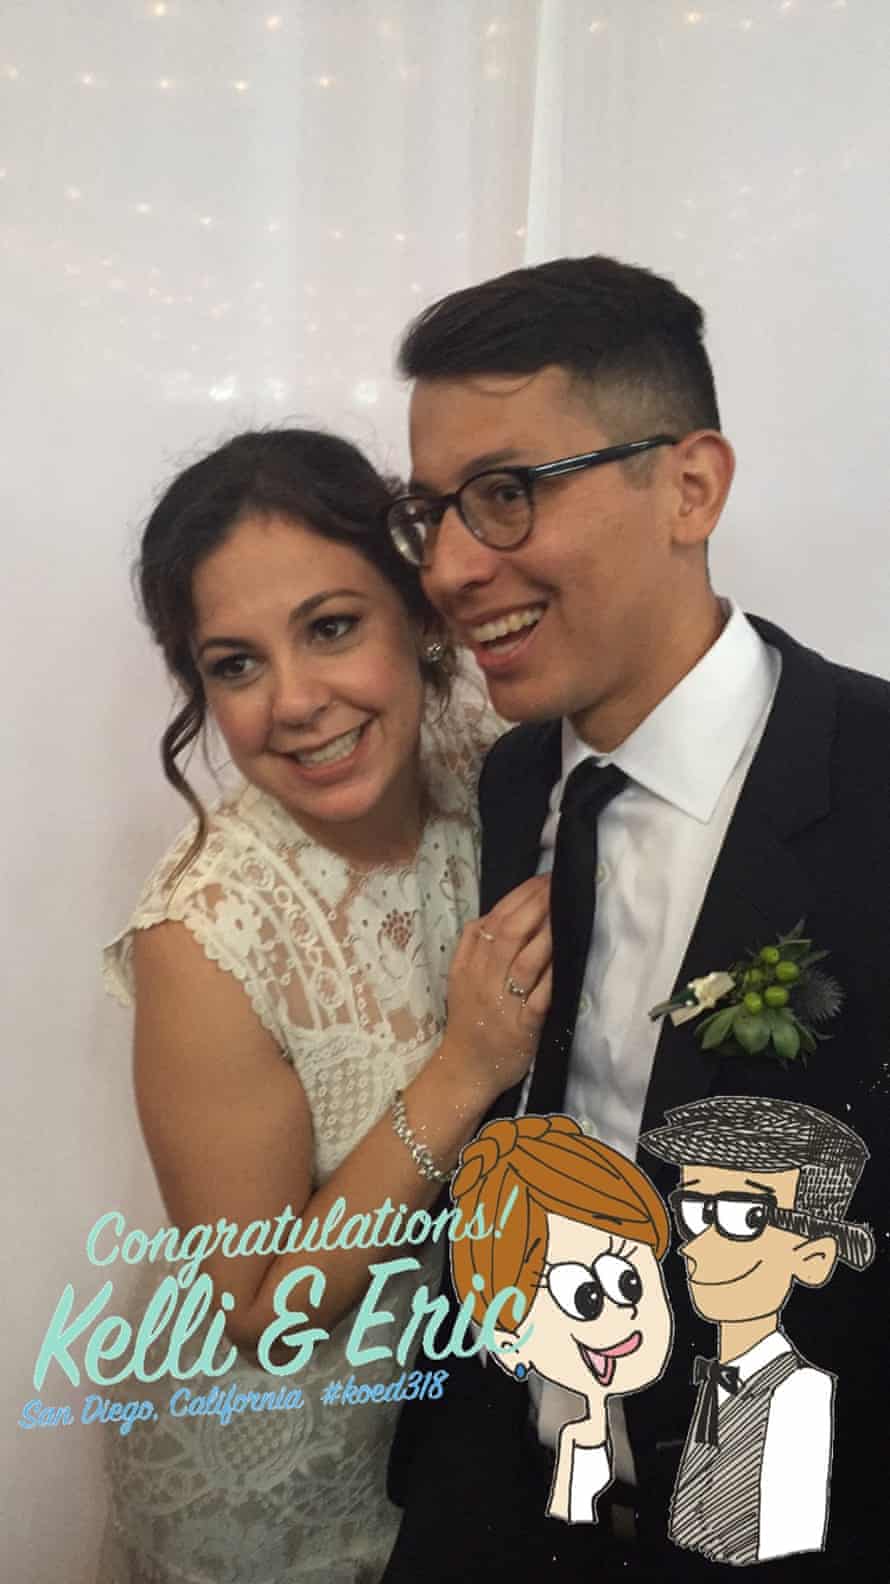 Kelli O’Merry bought an on-demand Snapchat geofilter to use at her wedding in March.